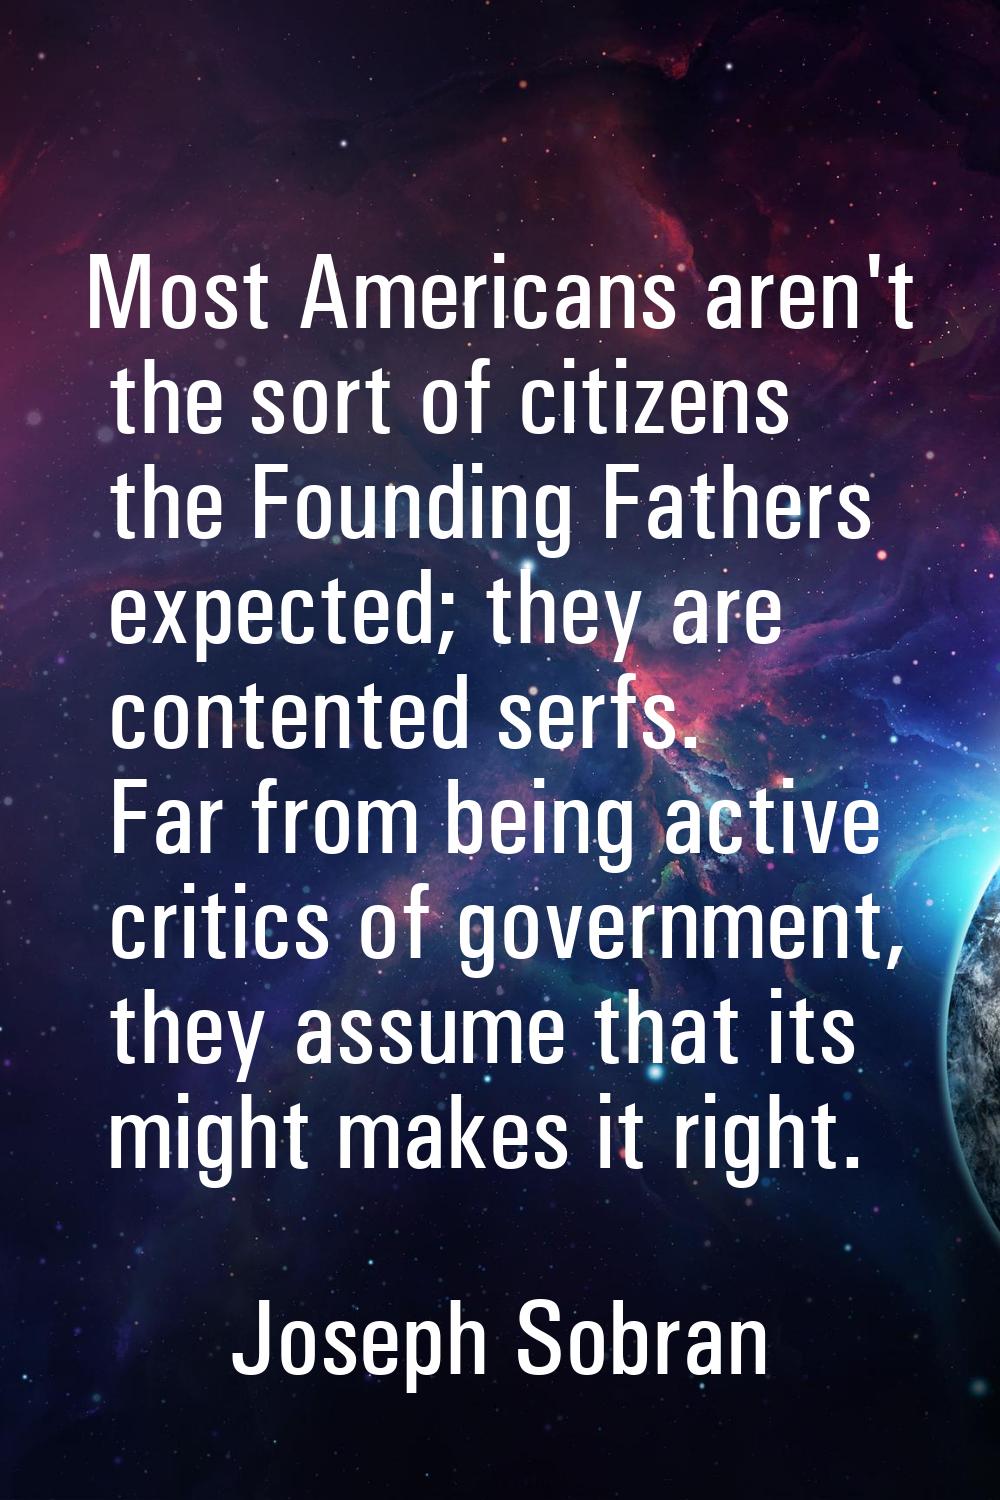 Most Americans aren't the sort of citizens the Founding Fathers expected; they are contented serfs.